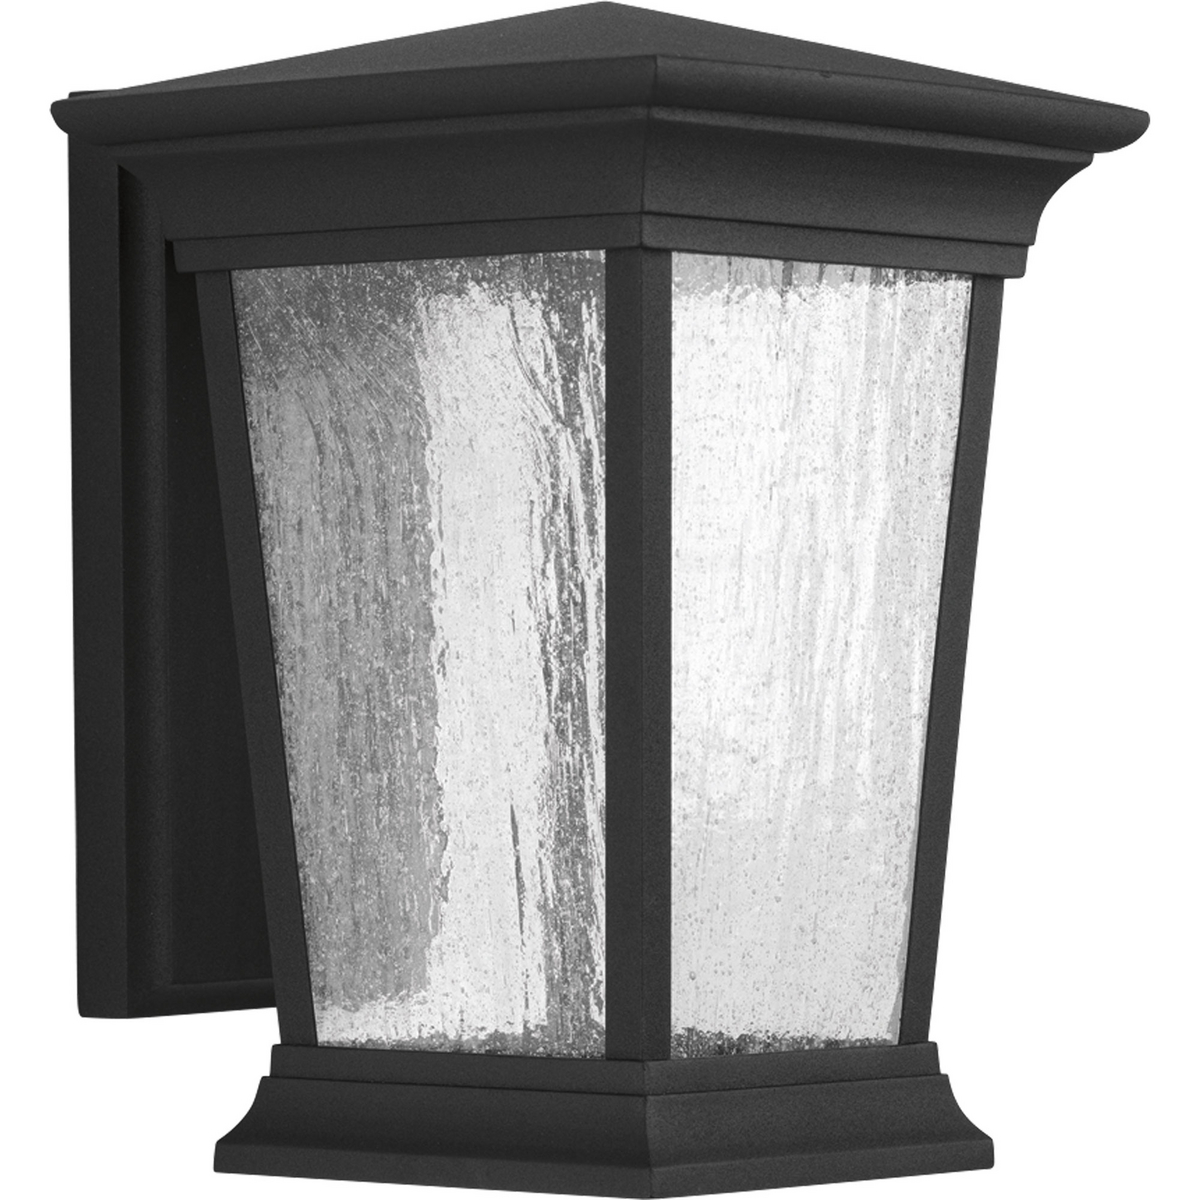 Arrive LED lanterns feature a die-cast aluminum, powder coated frame and heavily textured glass. One-light medium wall lantern. 90+ CRI, 3000K, 623 lumens (source) Energy Star.